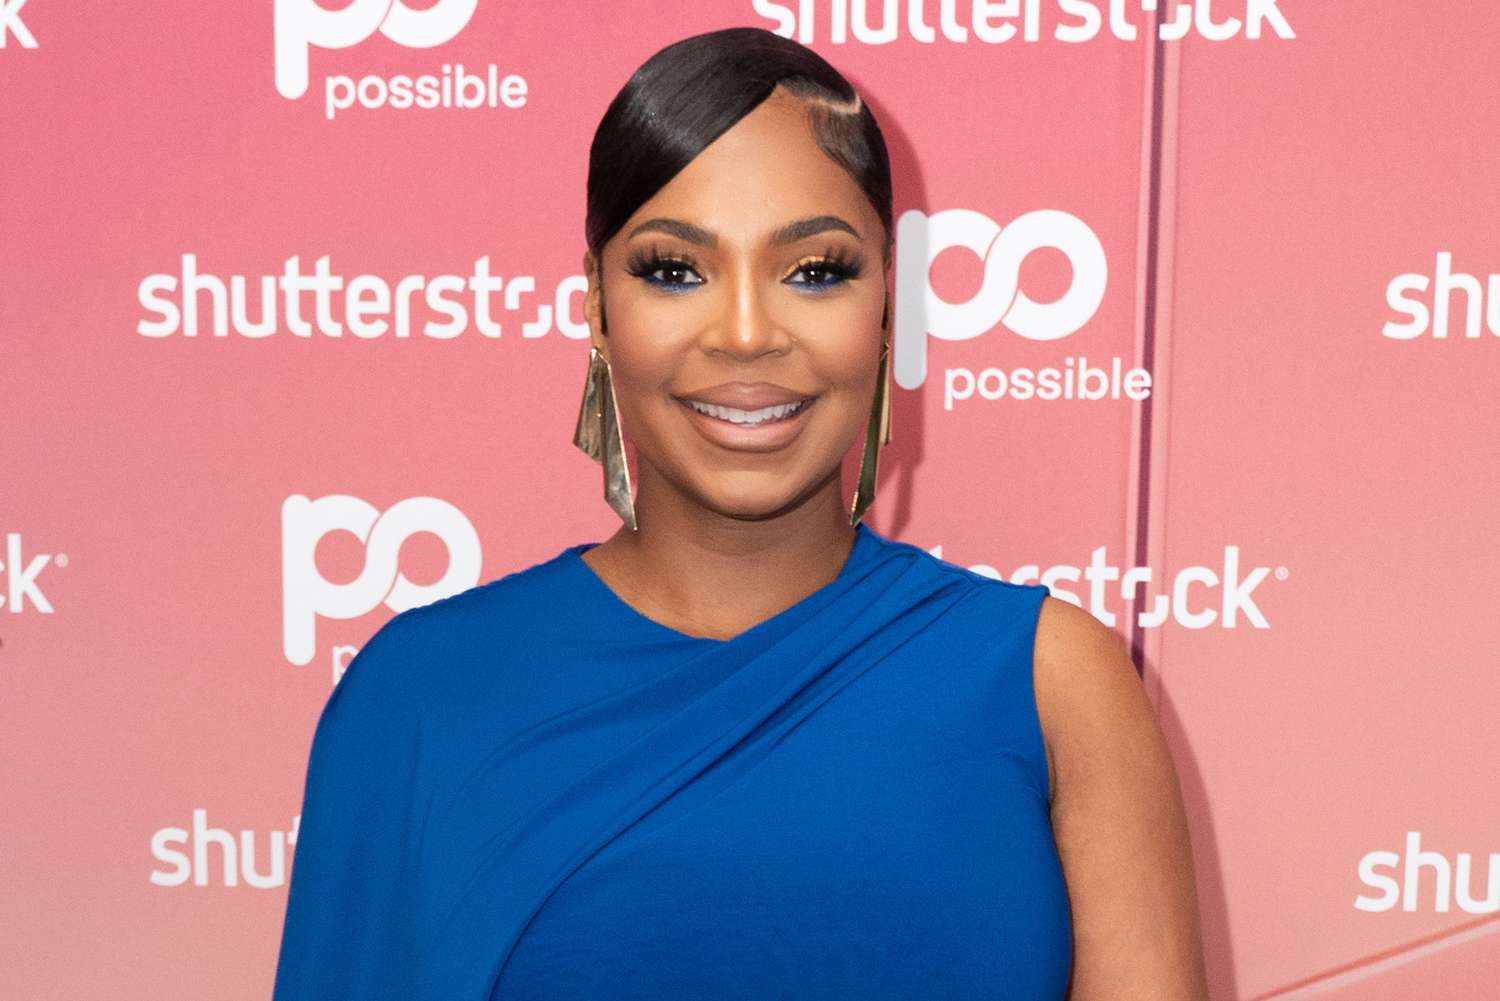 Pregnant Ashanti Shows Off Baby Bump in Curve-Hugging Dress [Video]